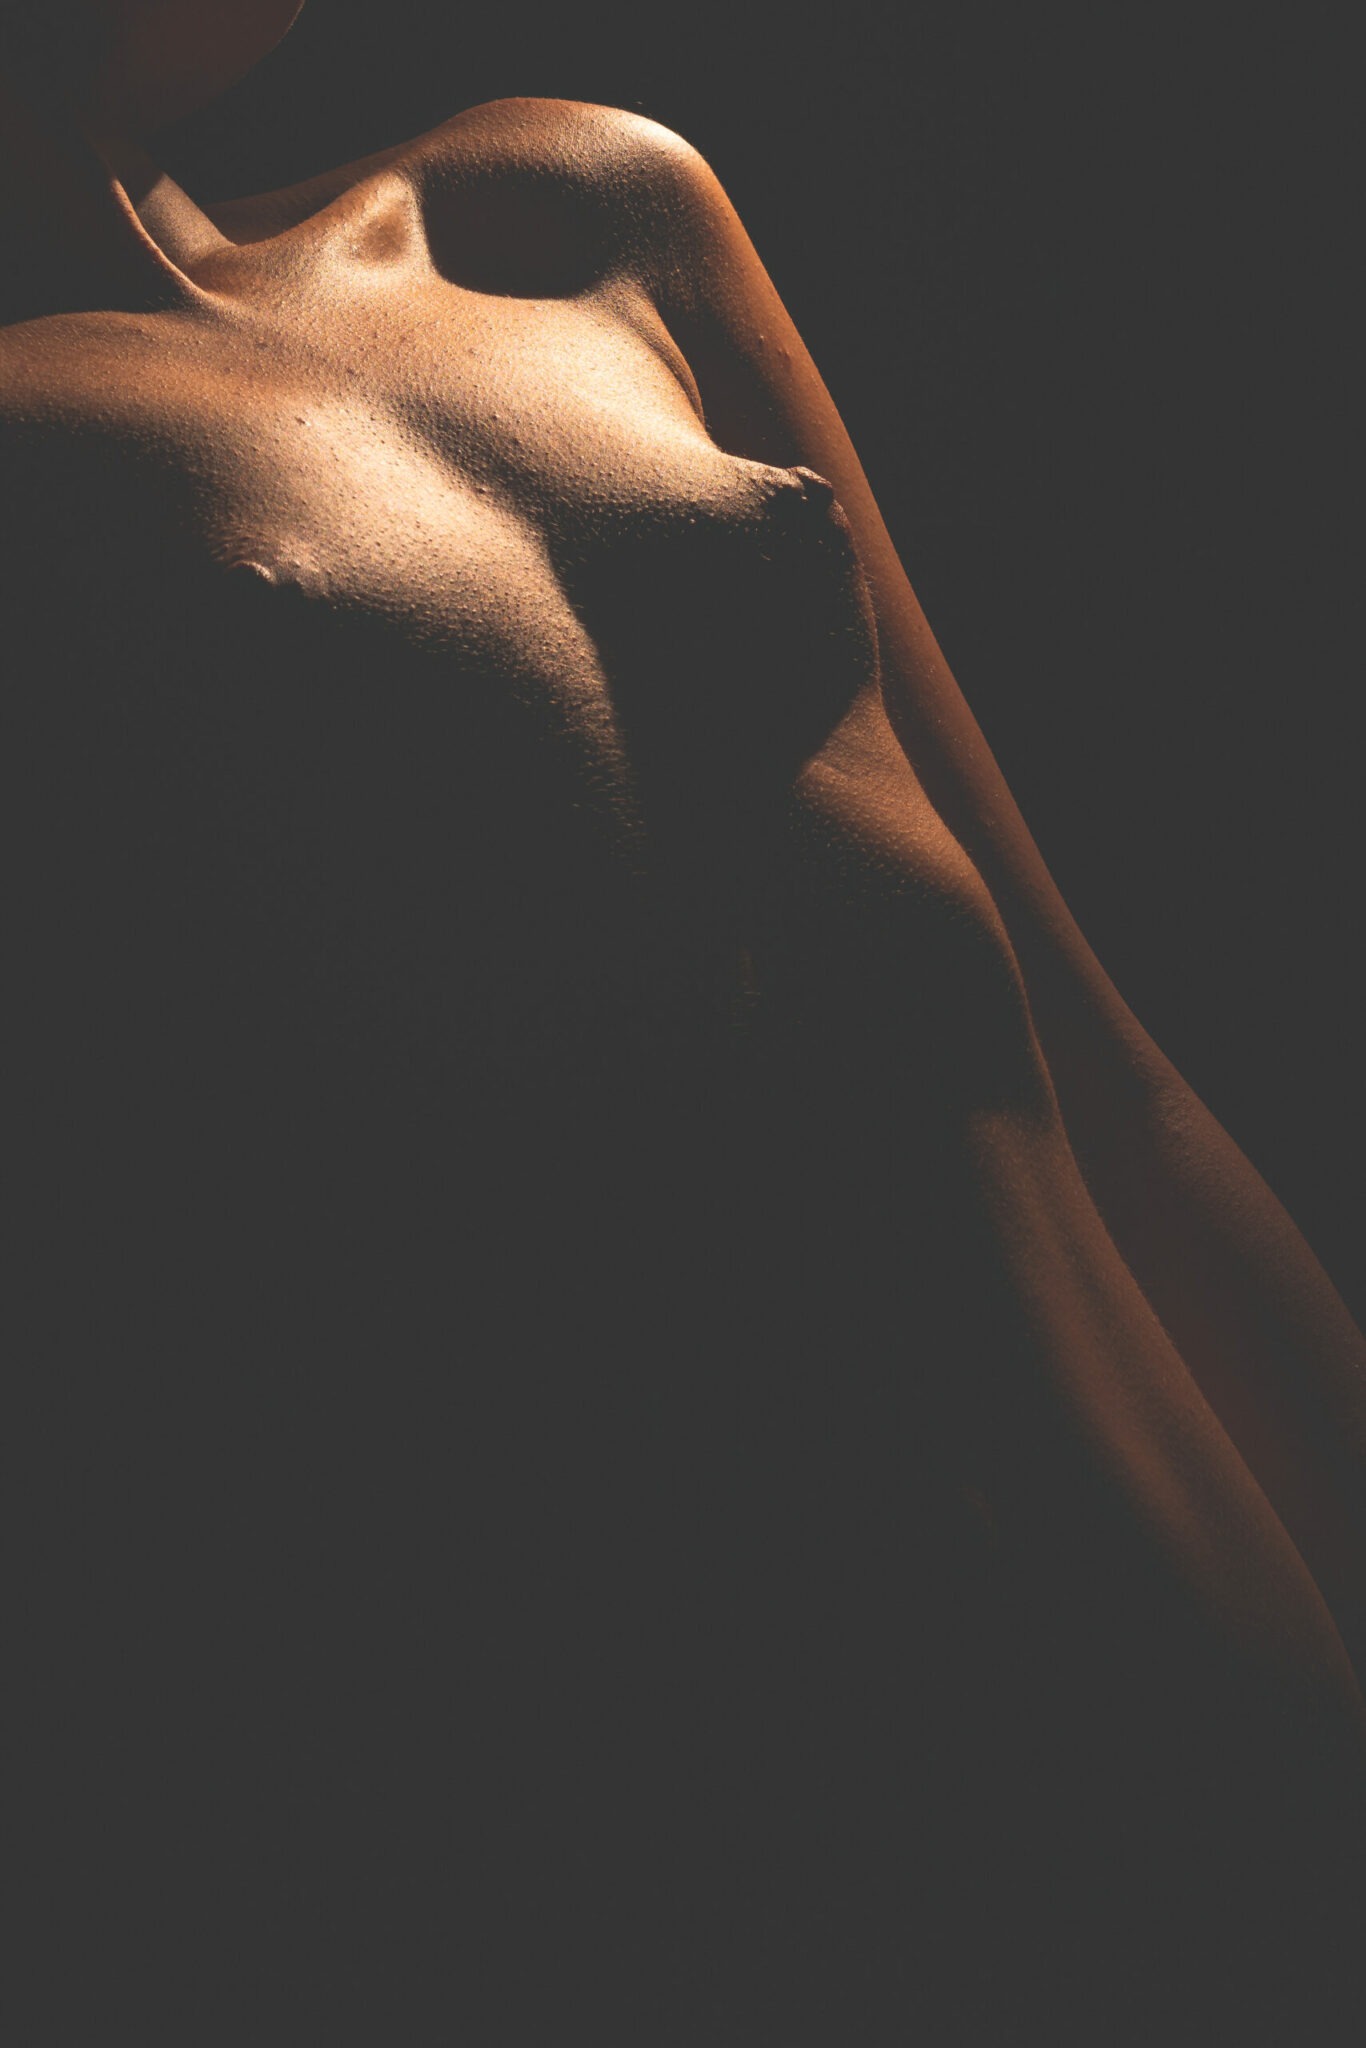 Artistic Nude - Bodyscapes